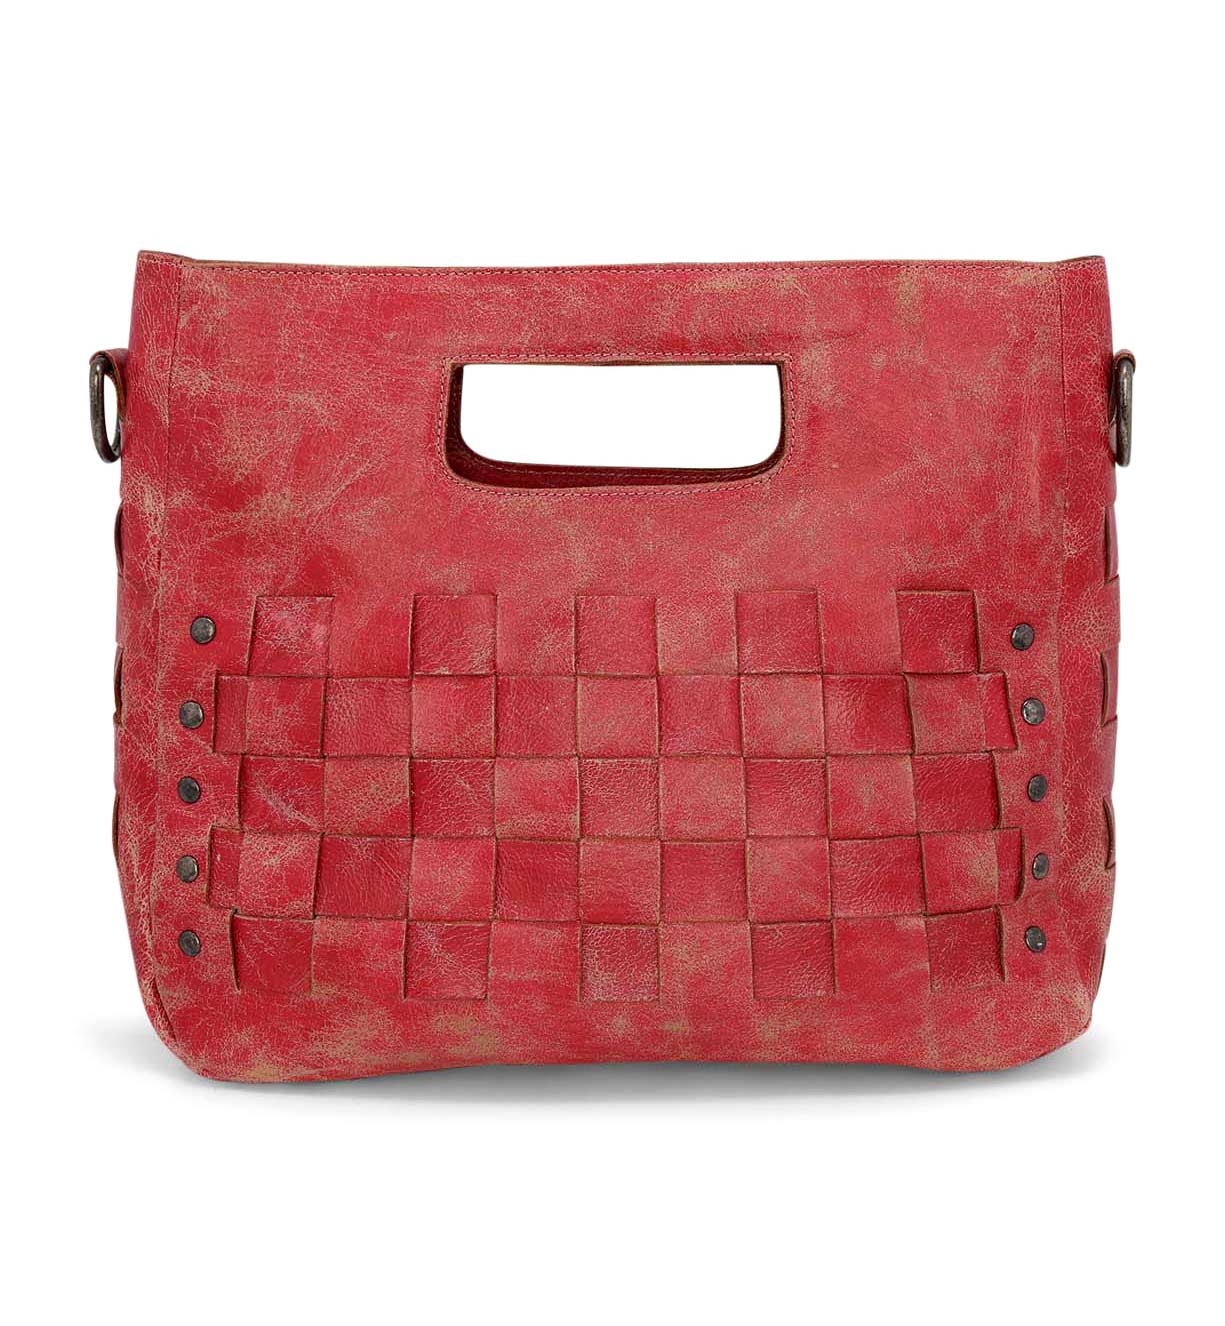 A distressed red Orchid handbag by Bed Stu.